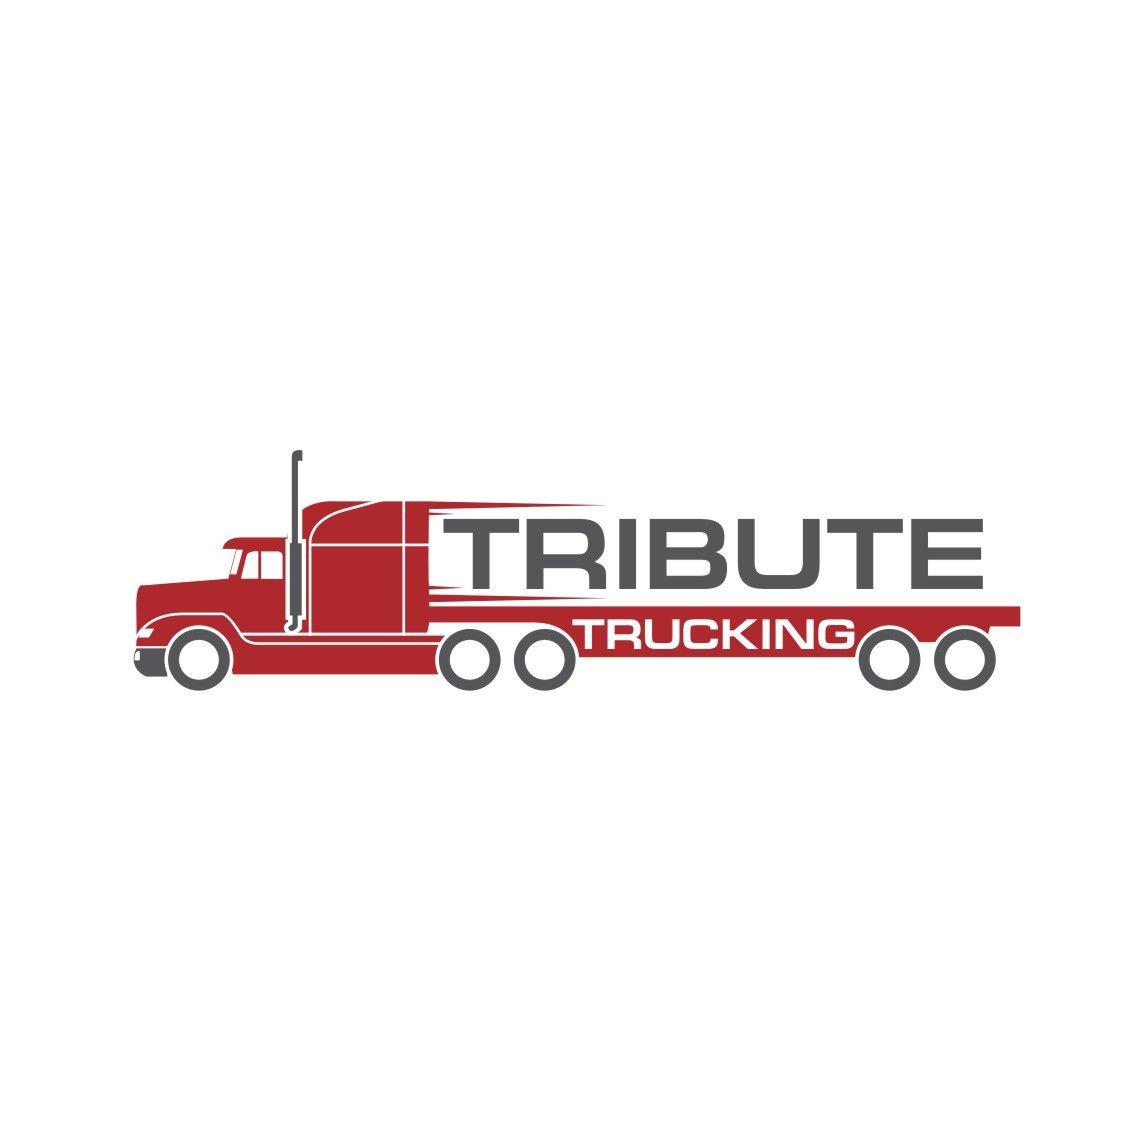 Creative Truck Company Logo - Masculine, Upmarket, It Company Logo Design for Tribute Trucking by ...